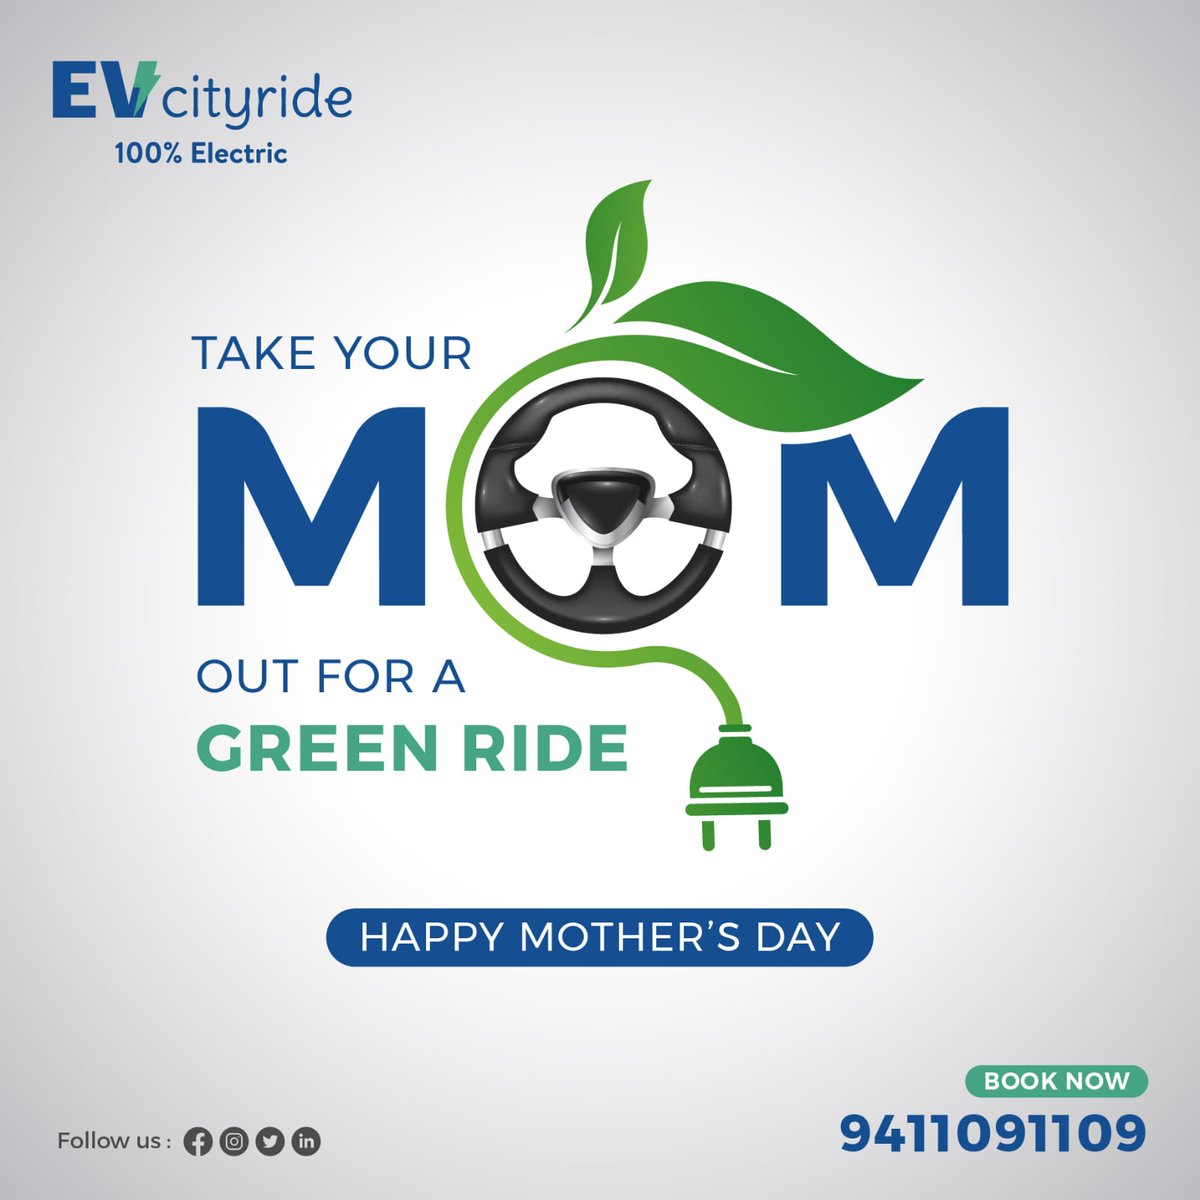 On this beautiful day, gift your Mom a safe & green ride with @evcityride 

Wishing you a very Happy Mother’s Day! 

#evcityride #greenride #mom #mothersday #mothersday2022 #giftyourmom